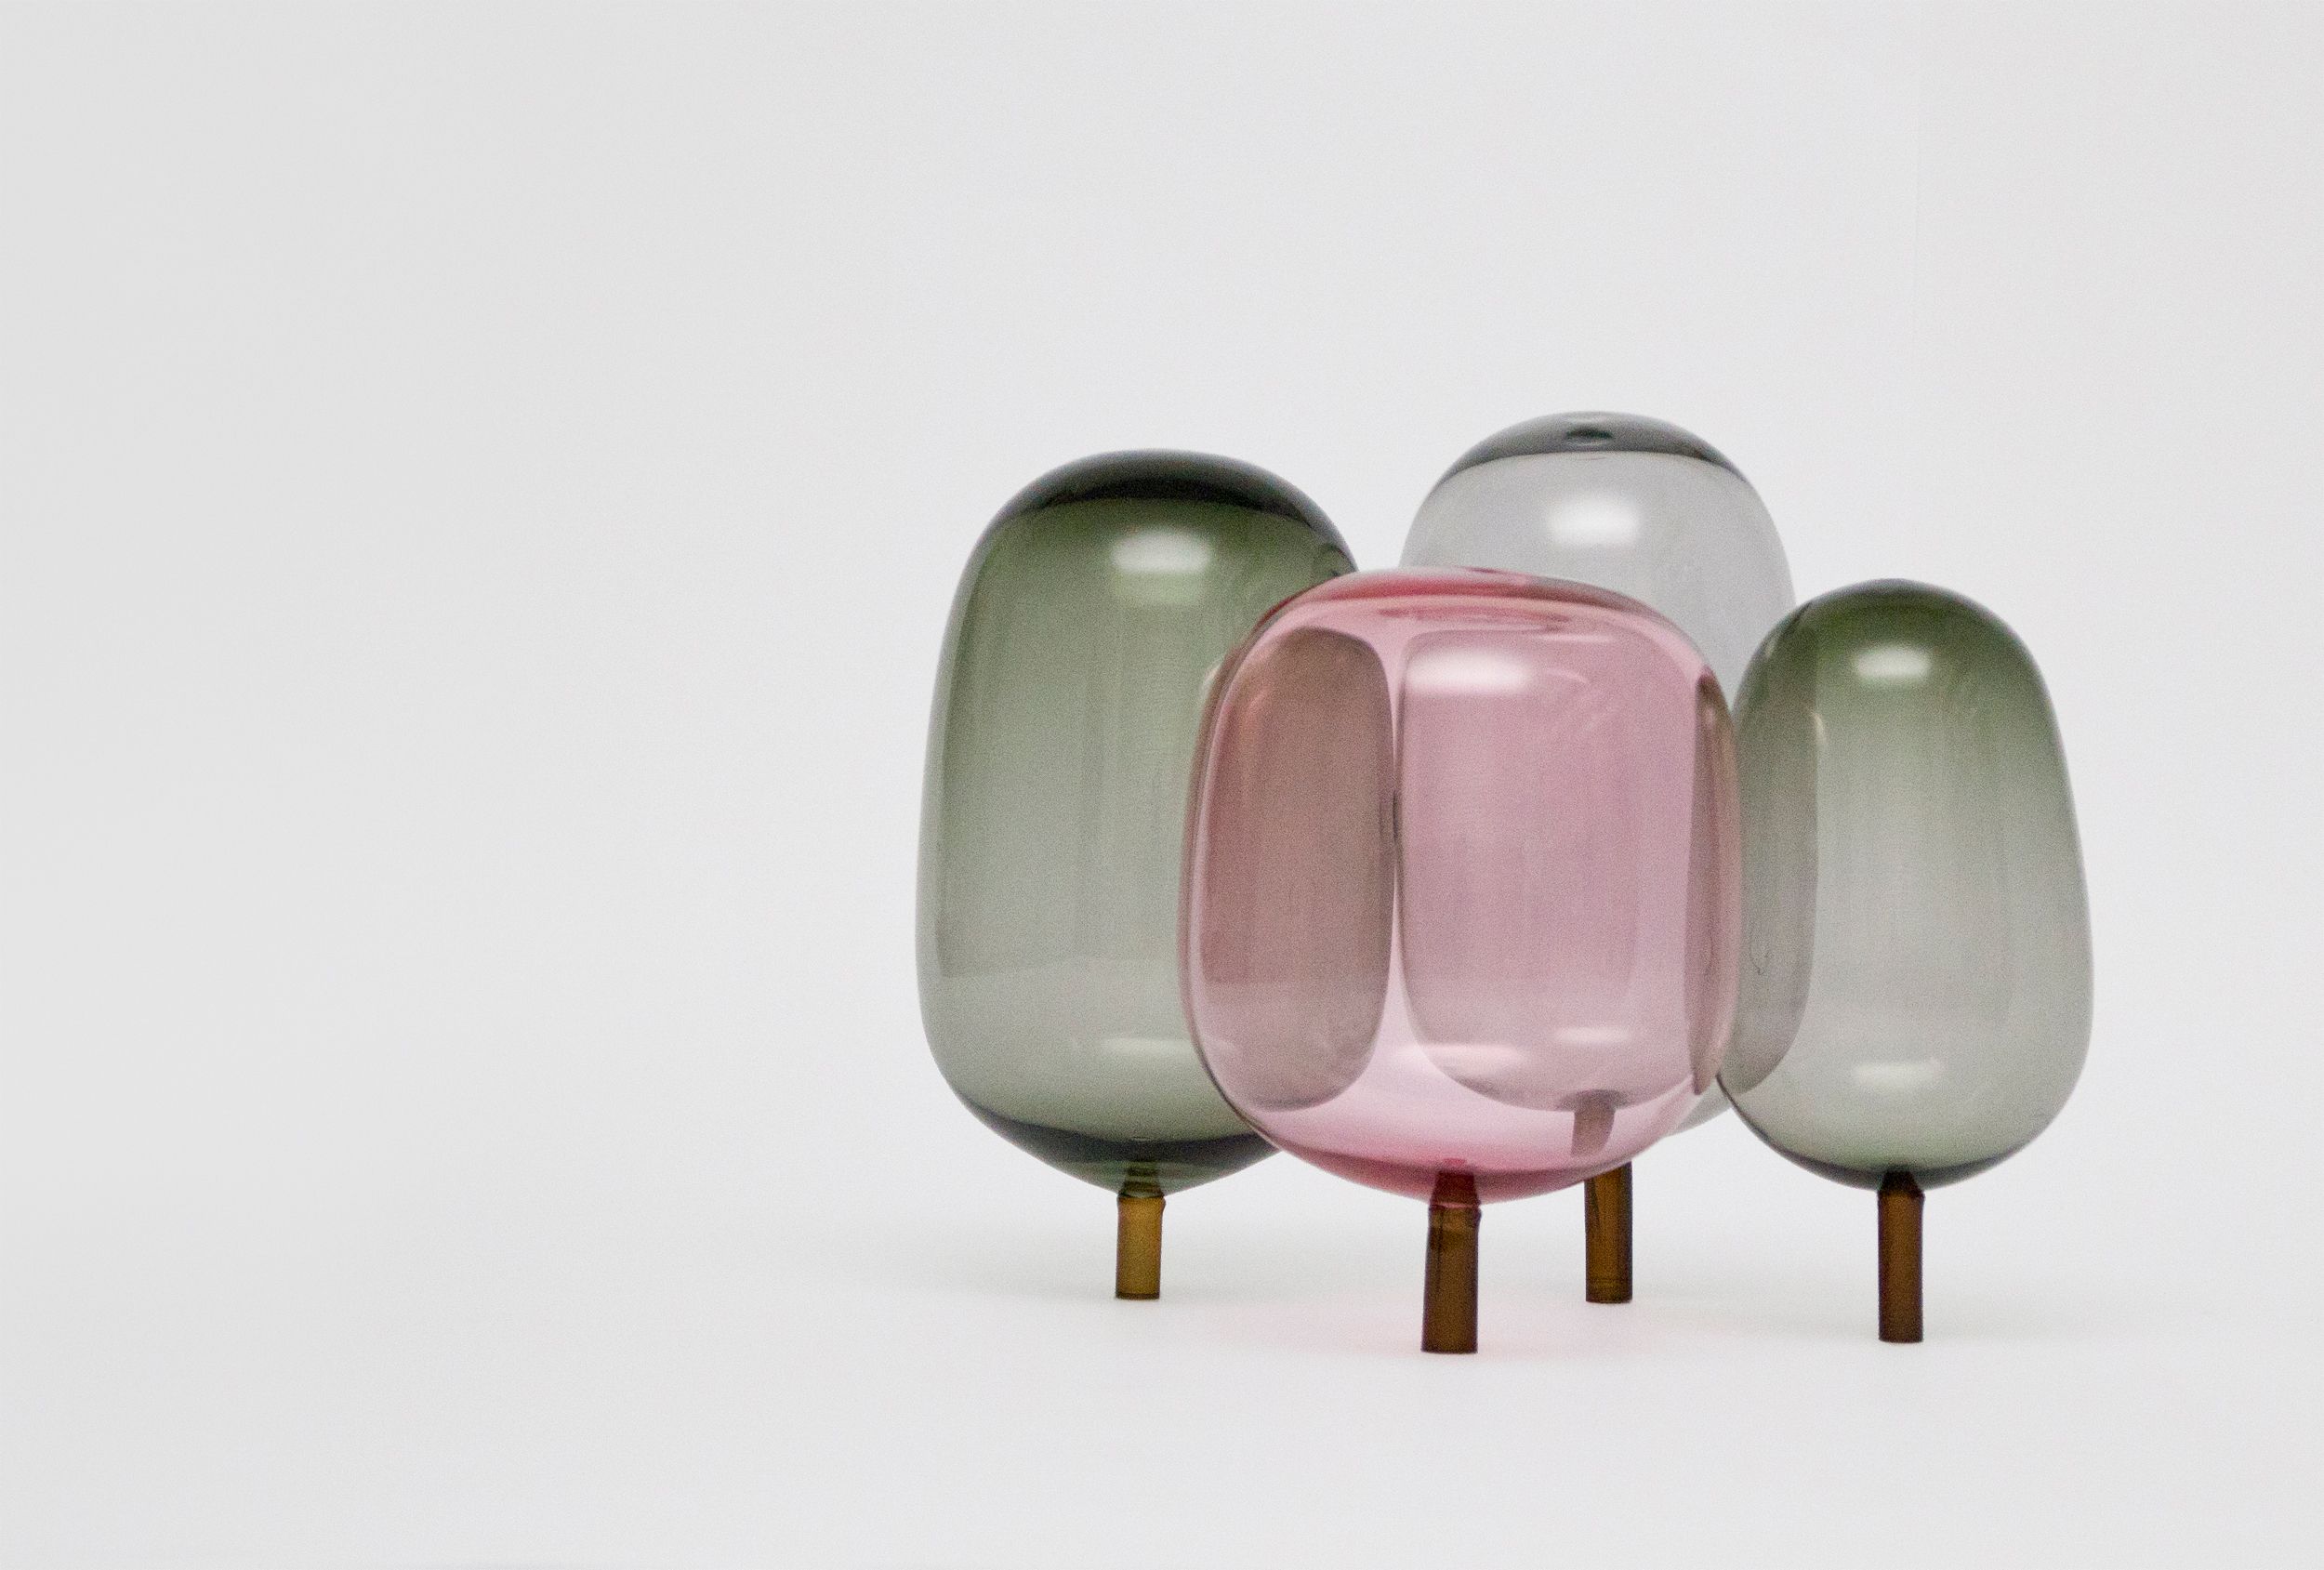 The woods designed by Jonas Stokke, Øystein Austad and Andreas Engesvik, pink and and grey glass sculptures, mouth blown glass